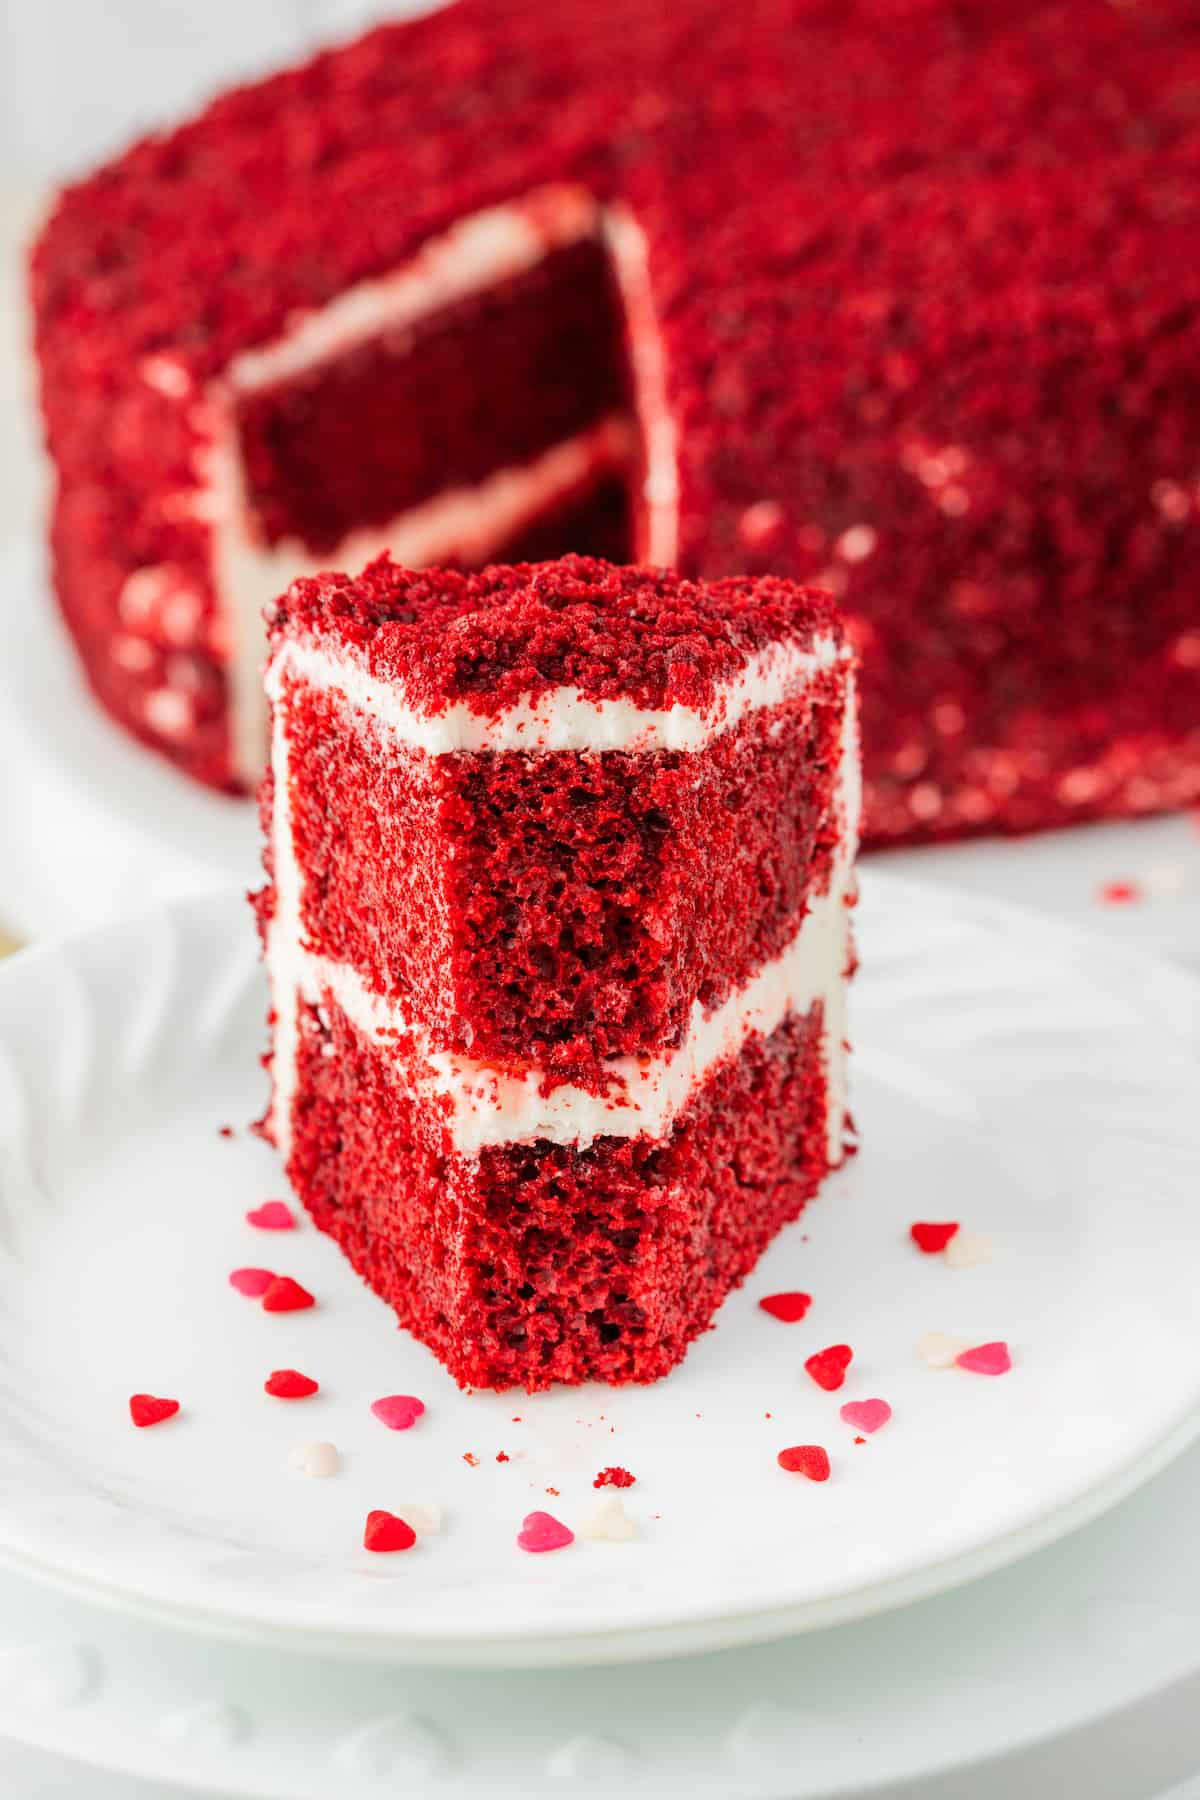 A delectable slice of red velvet cake placed elegantly on a plate.